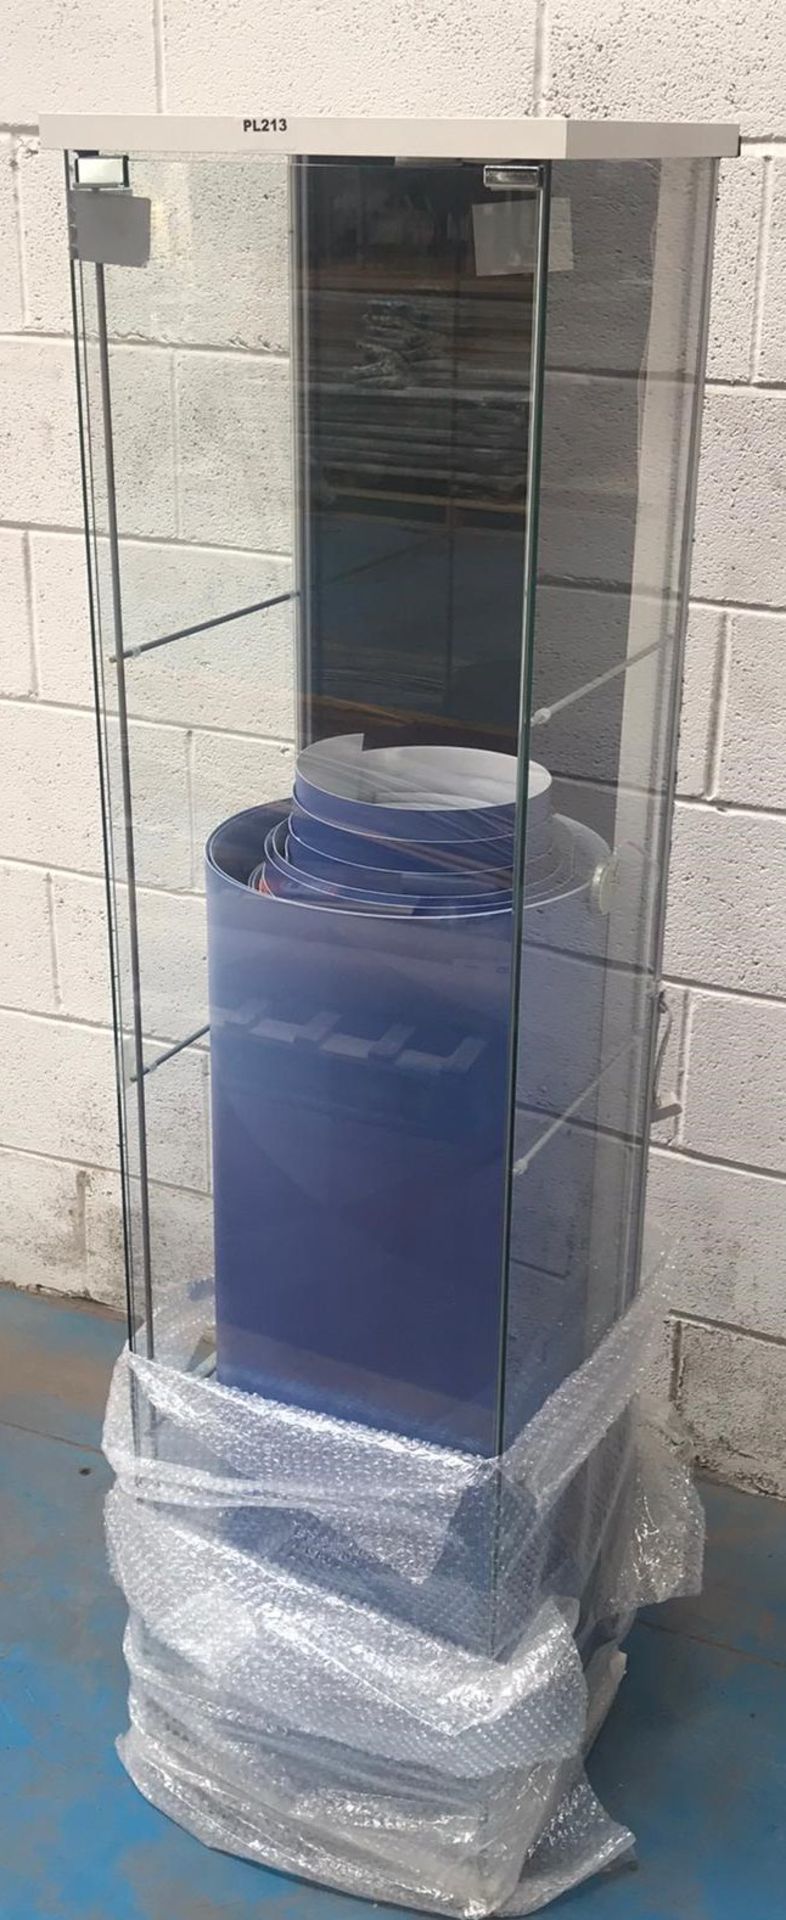 1 x Glass Display Cabinet - Used in Very Good Condition- Product Code: N/A - CL538 - Ref: PL213 -